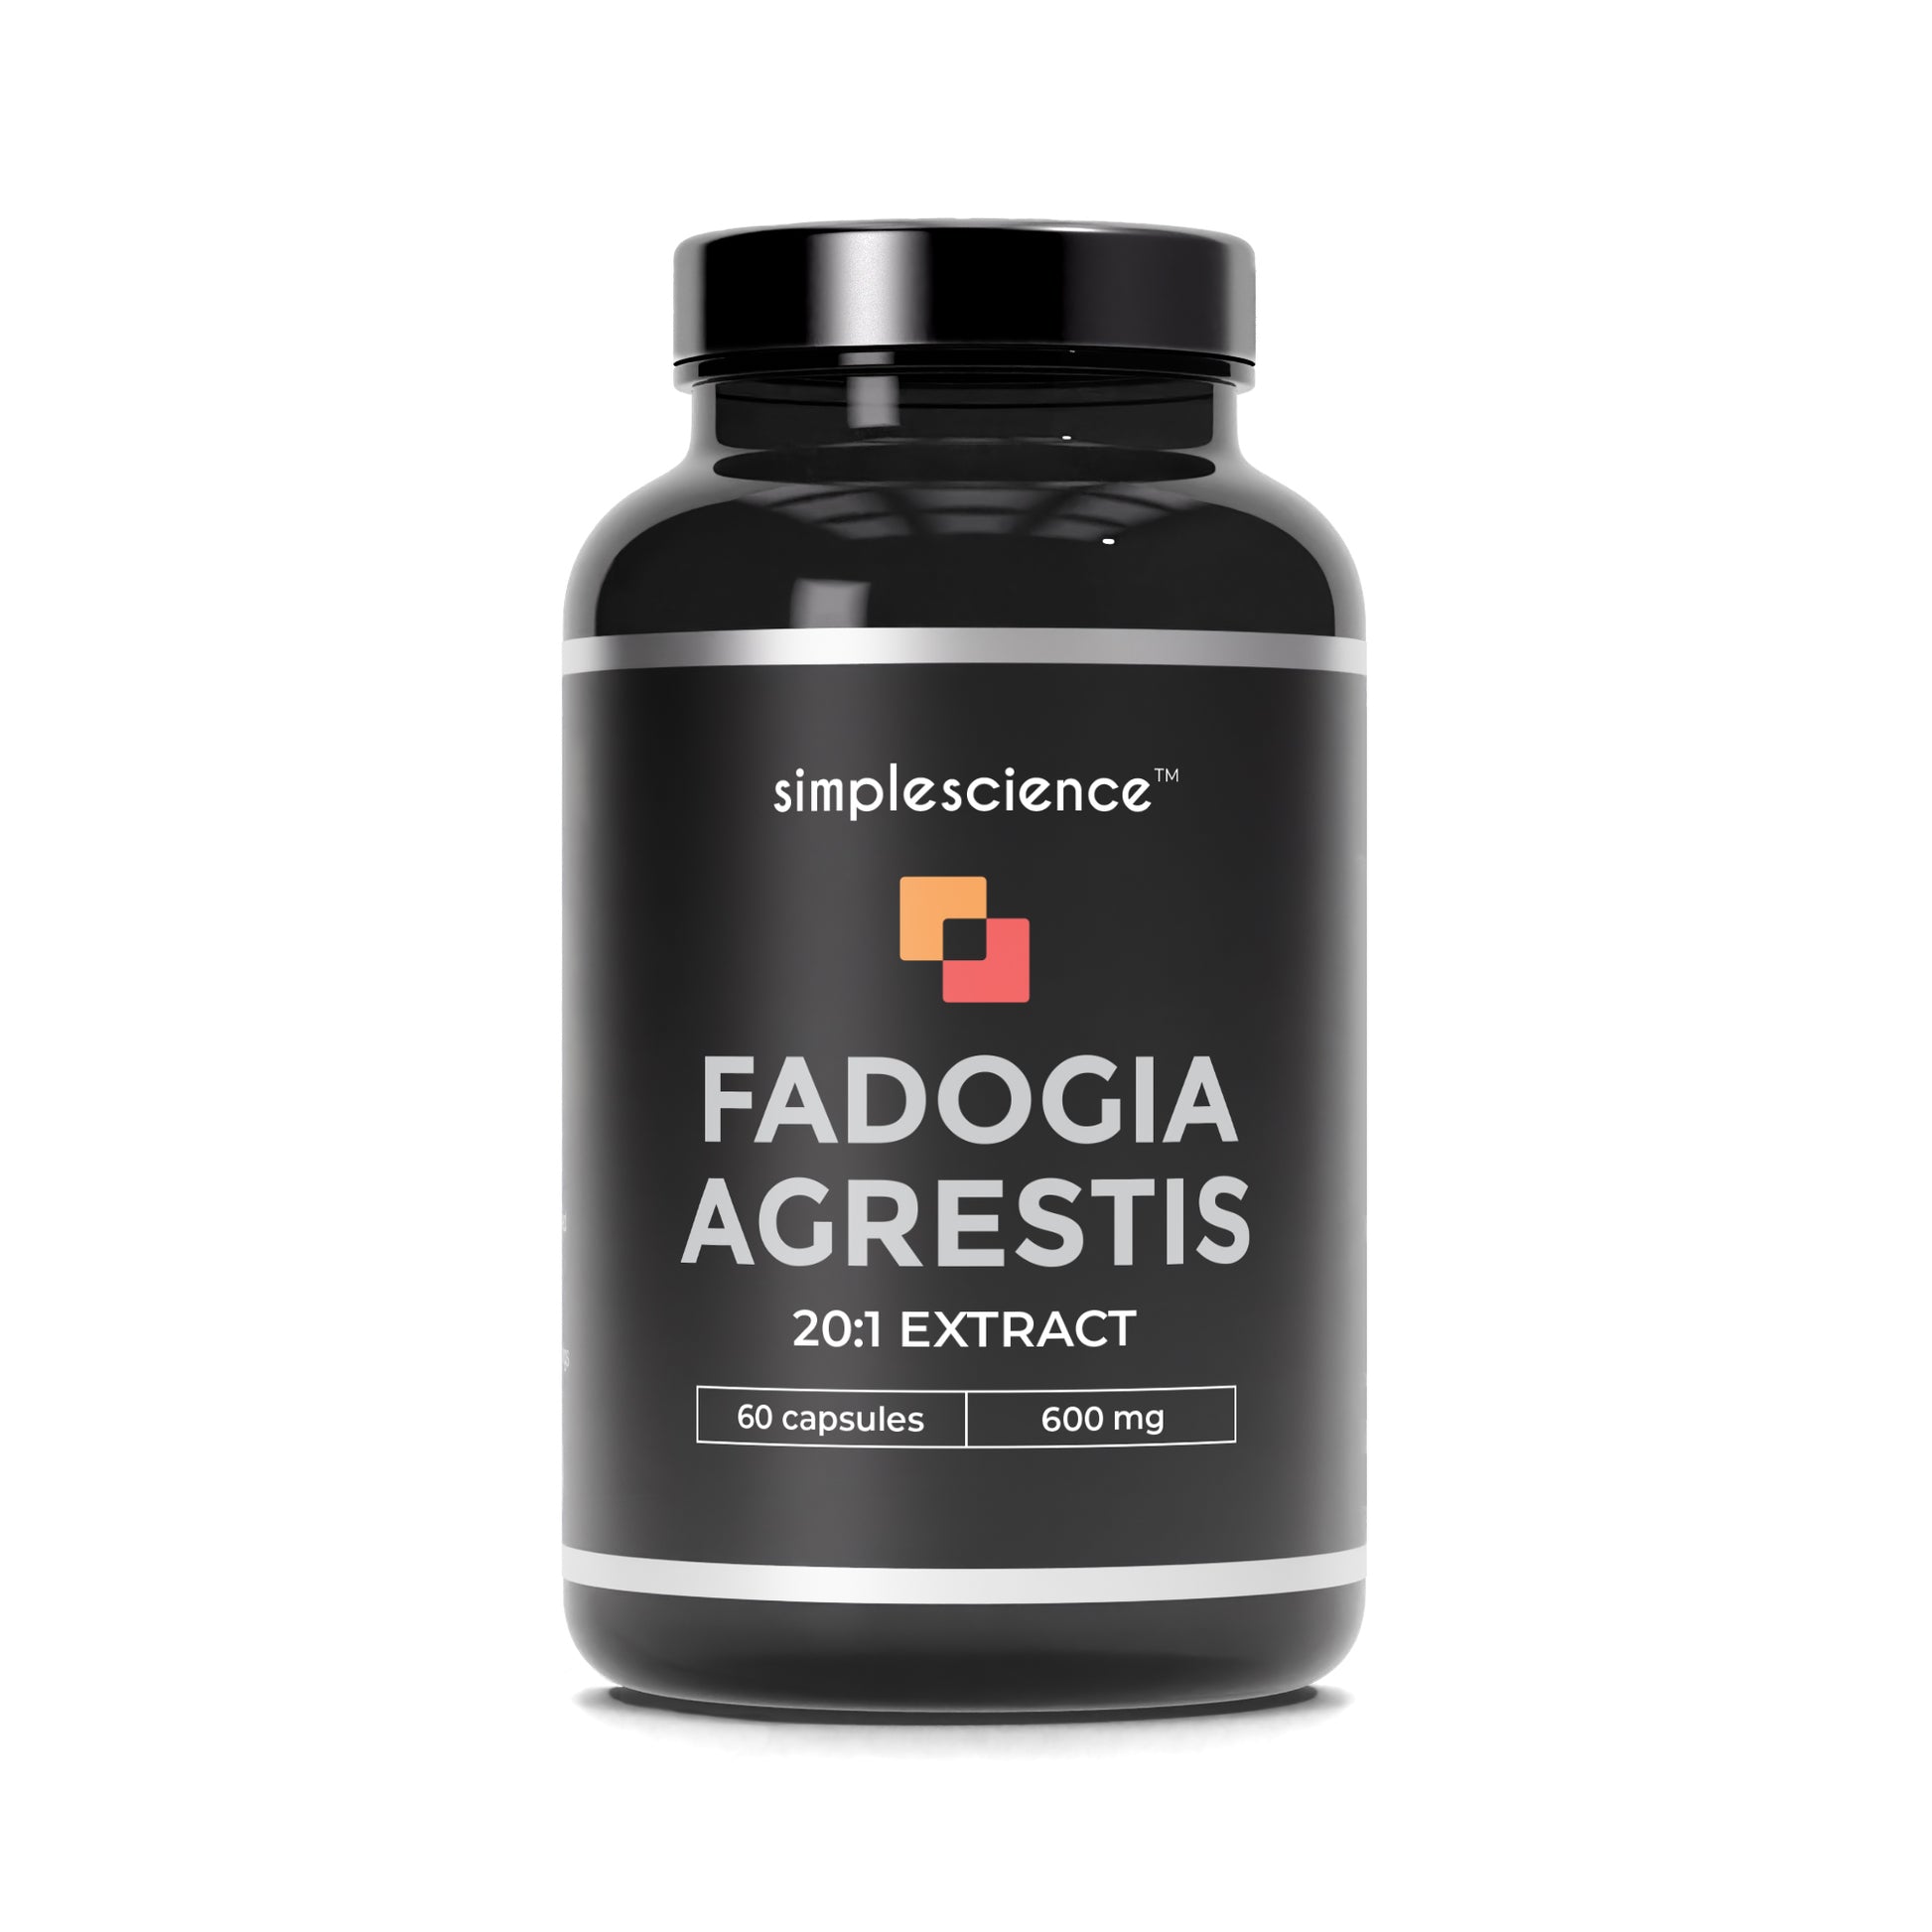 Fadogia agrestis 600mg simplescience 20:1 extract supplement 60 capsules benefits best supplement guide. Highest concentration. Andrew Huberman dosage. Front of bottle 